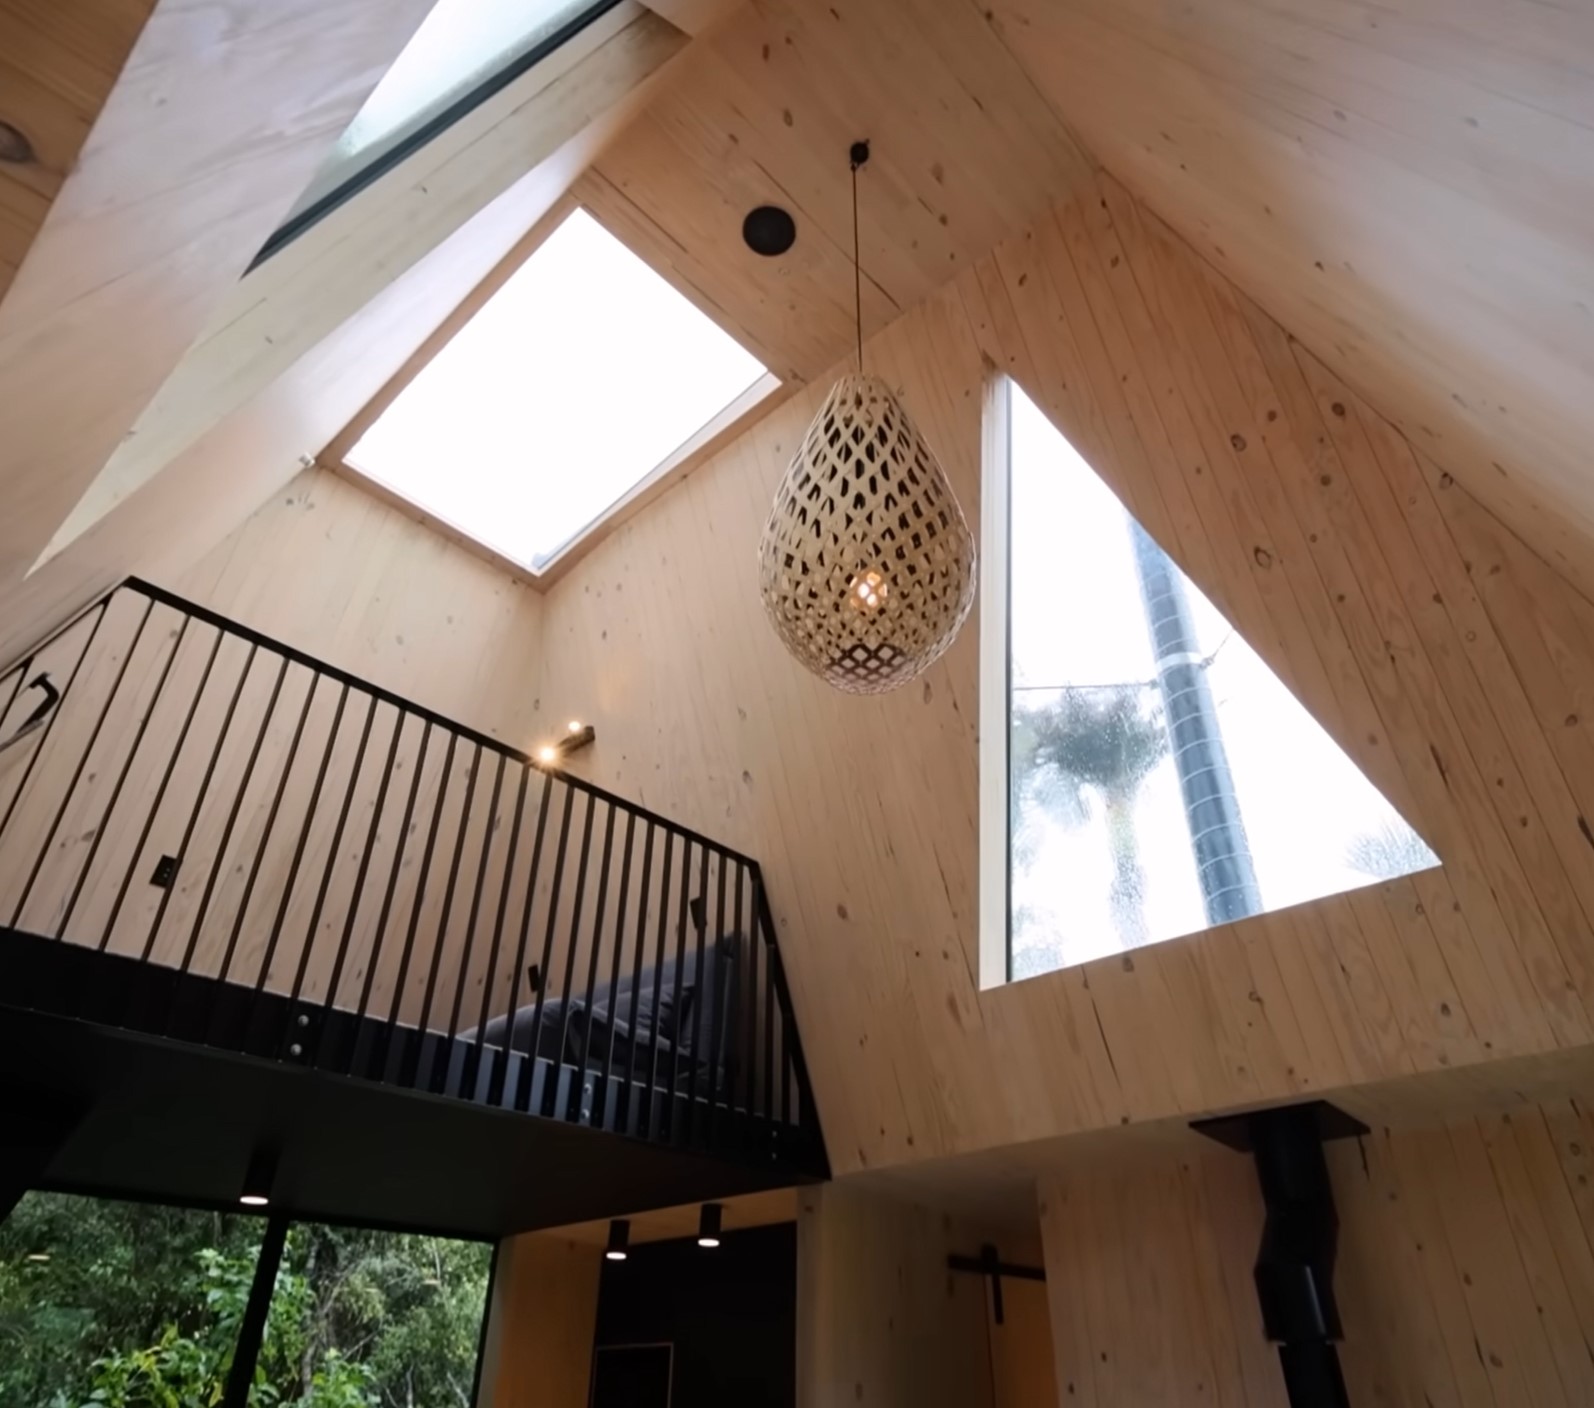 The skylights of the cabin.